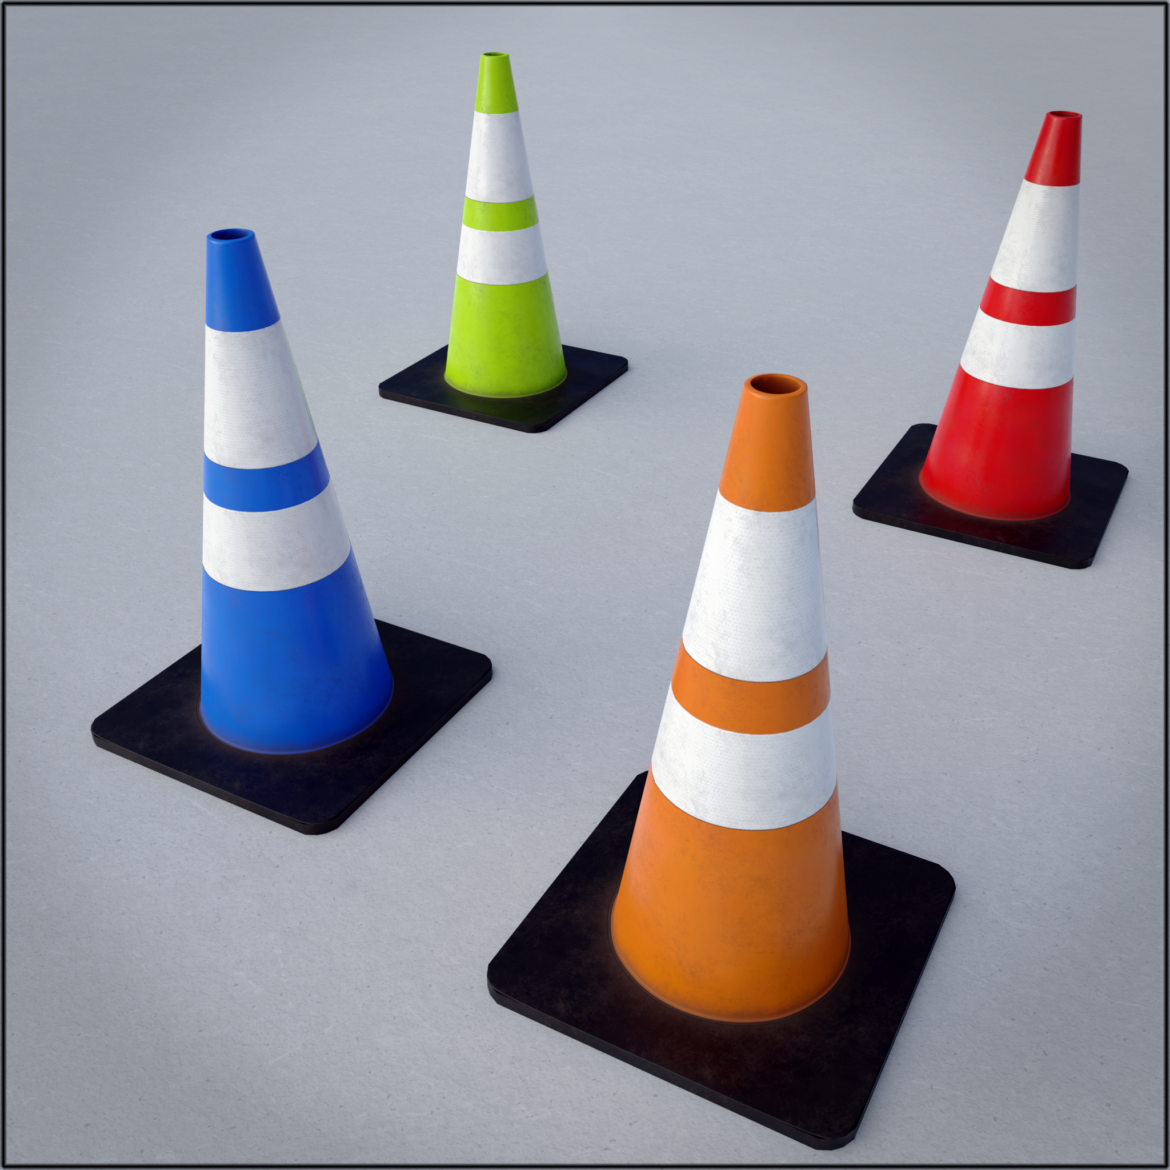  <a class="continue" href="https://www.flatpyramid.com/3d-models/architecture-3d-models/objects/traffic-cone-game-asset-multi-pack/">Continue Reading<span> Traffic Cone game asset multi-pack</span></a>